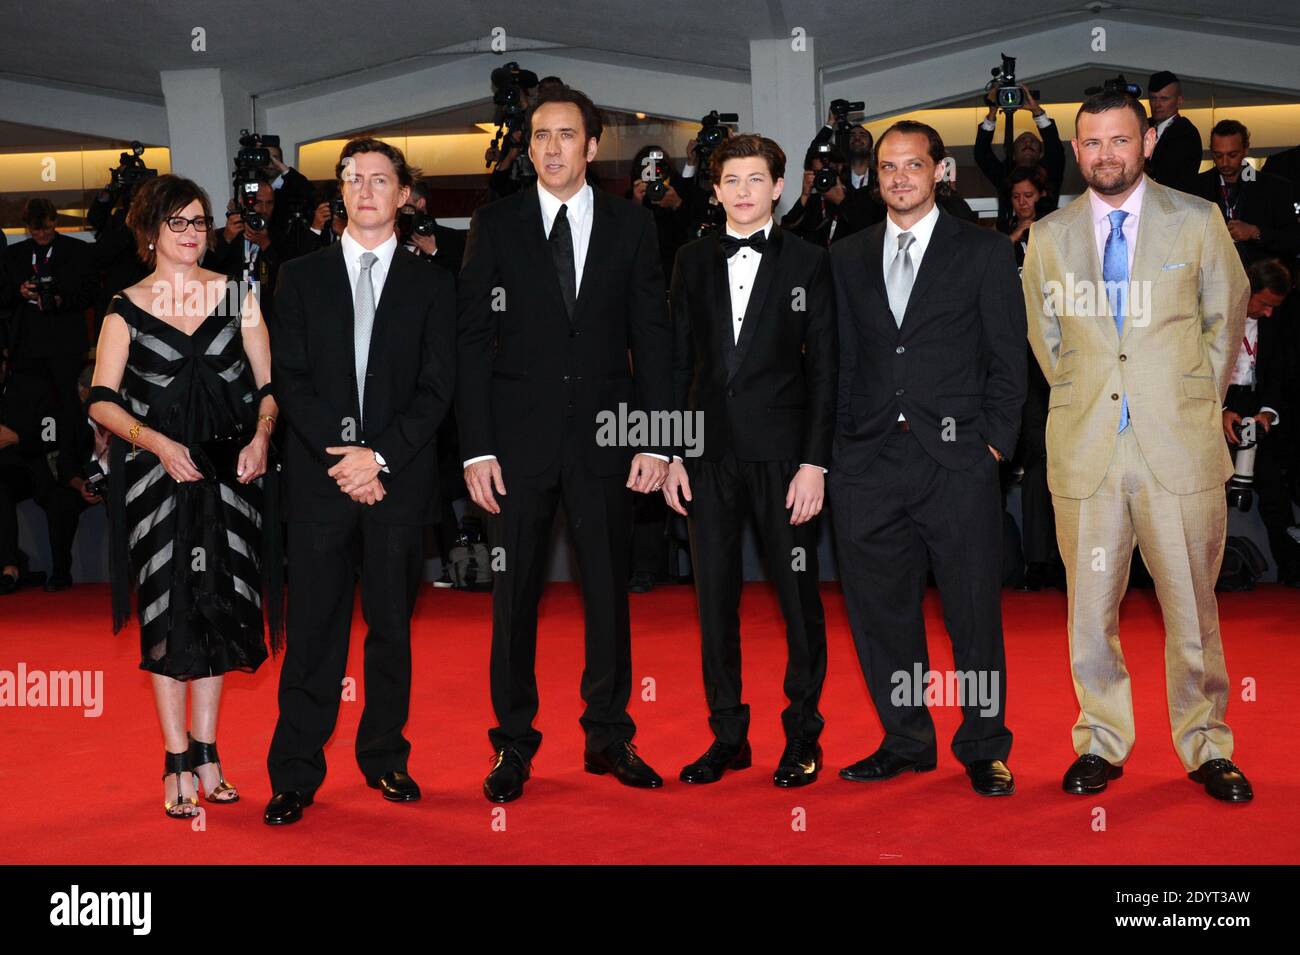 Producer Christopher Woodrow, actors Ronnie Blevins, Tye Sheridan, Nicolas Cage, director David Gordon Green and producer Lisa Muska attending the premiere for the film Joe as part of the 70th Venice International Film Festival (Mostra), at Lido island in Venice, Italy, on August 30, 2013. Photo by Aurore Marechal/ABACAPRESS.COM Stock Photo